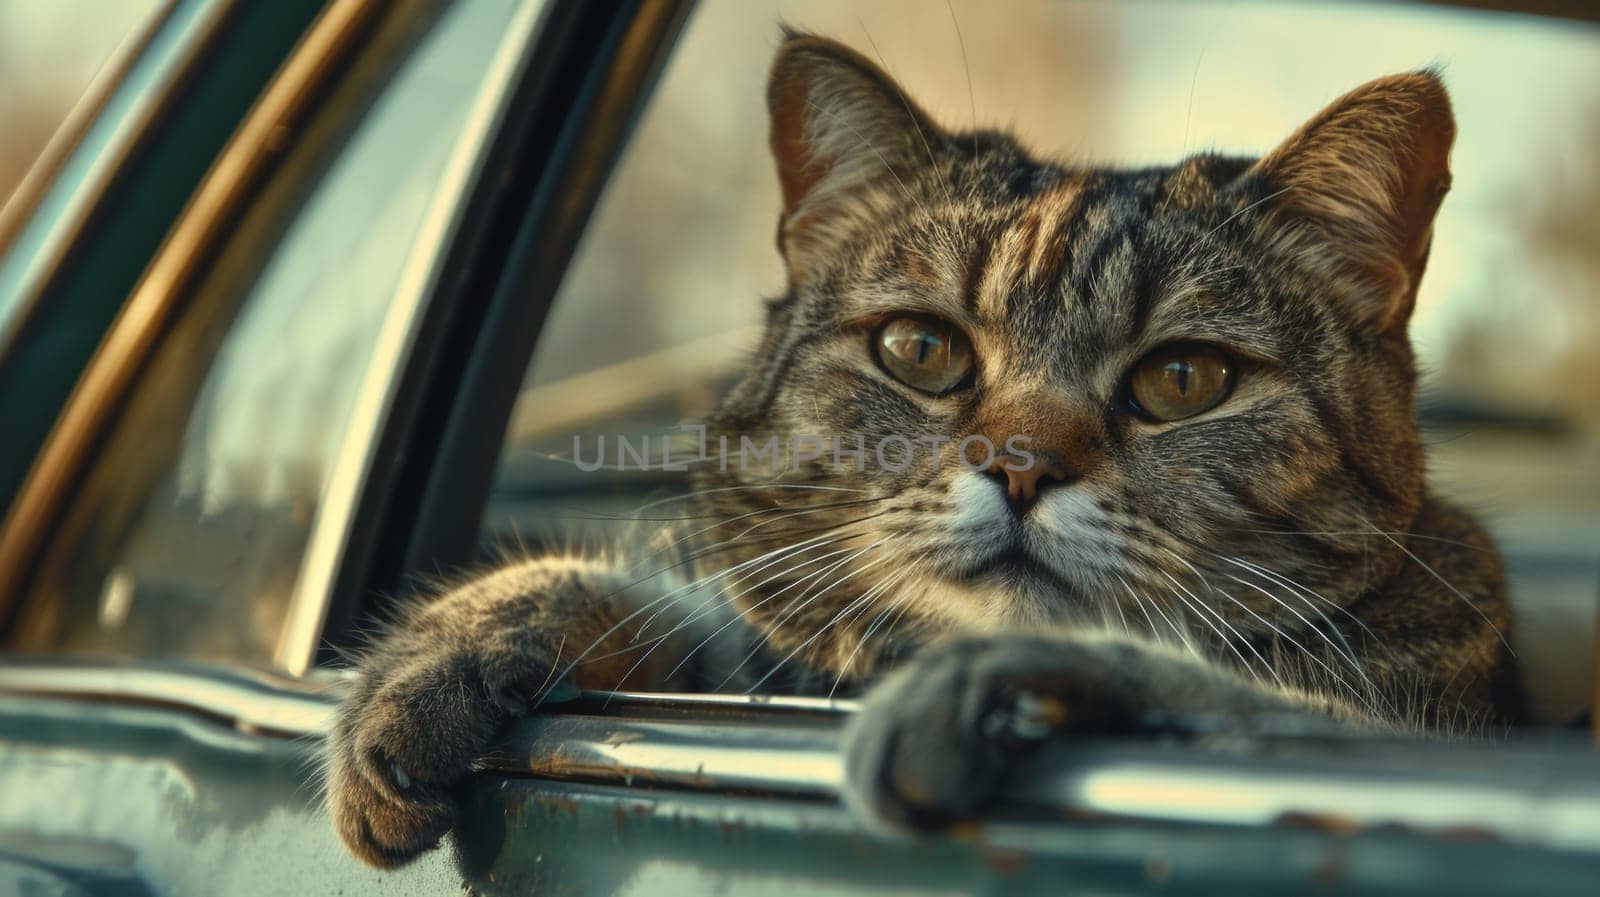 A cat sitting in a car window with its paws on the door